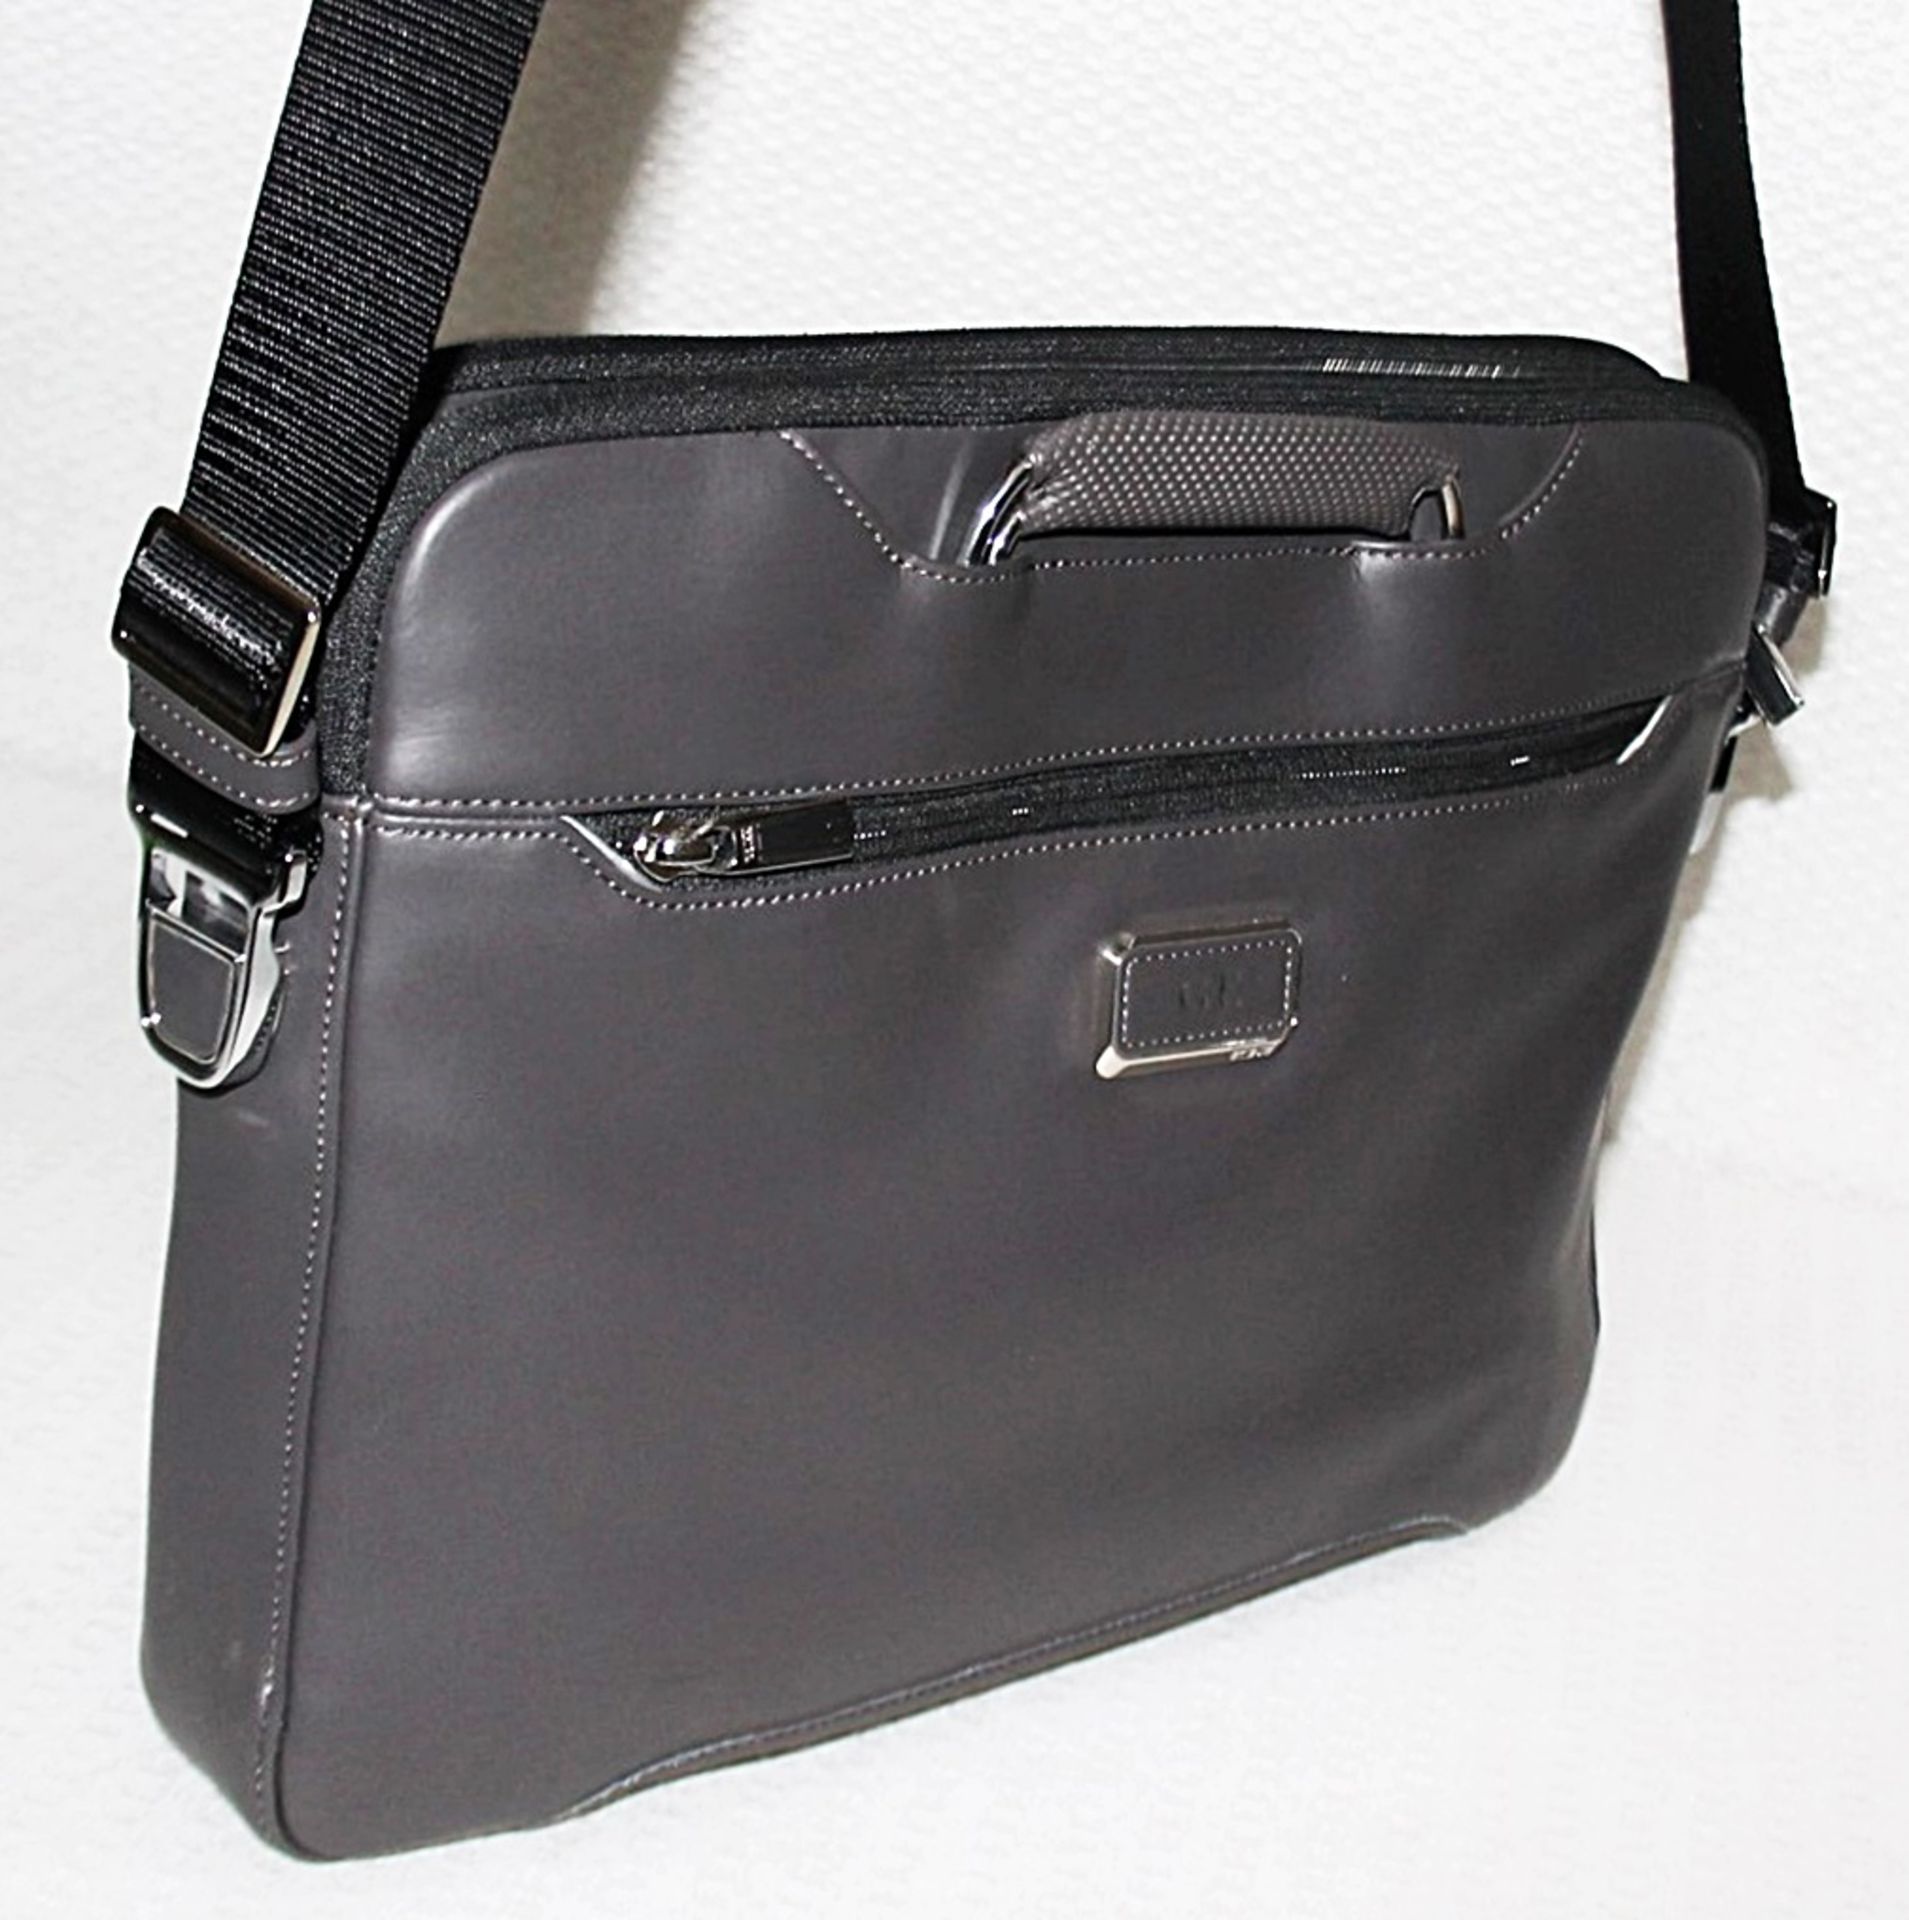 1 x TUMI Luxury Leather Slim Brief Case With Strap In A Taupe / Gunmetal Grey - Original Price £745 - Image 4 of 14